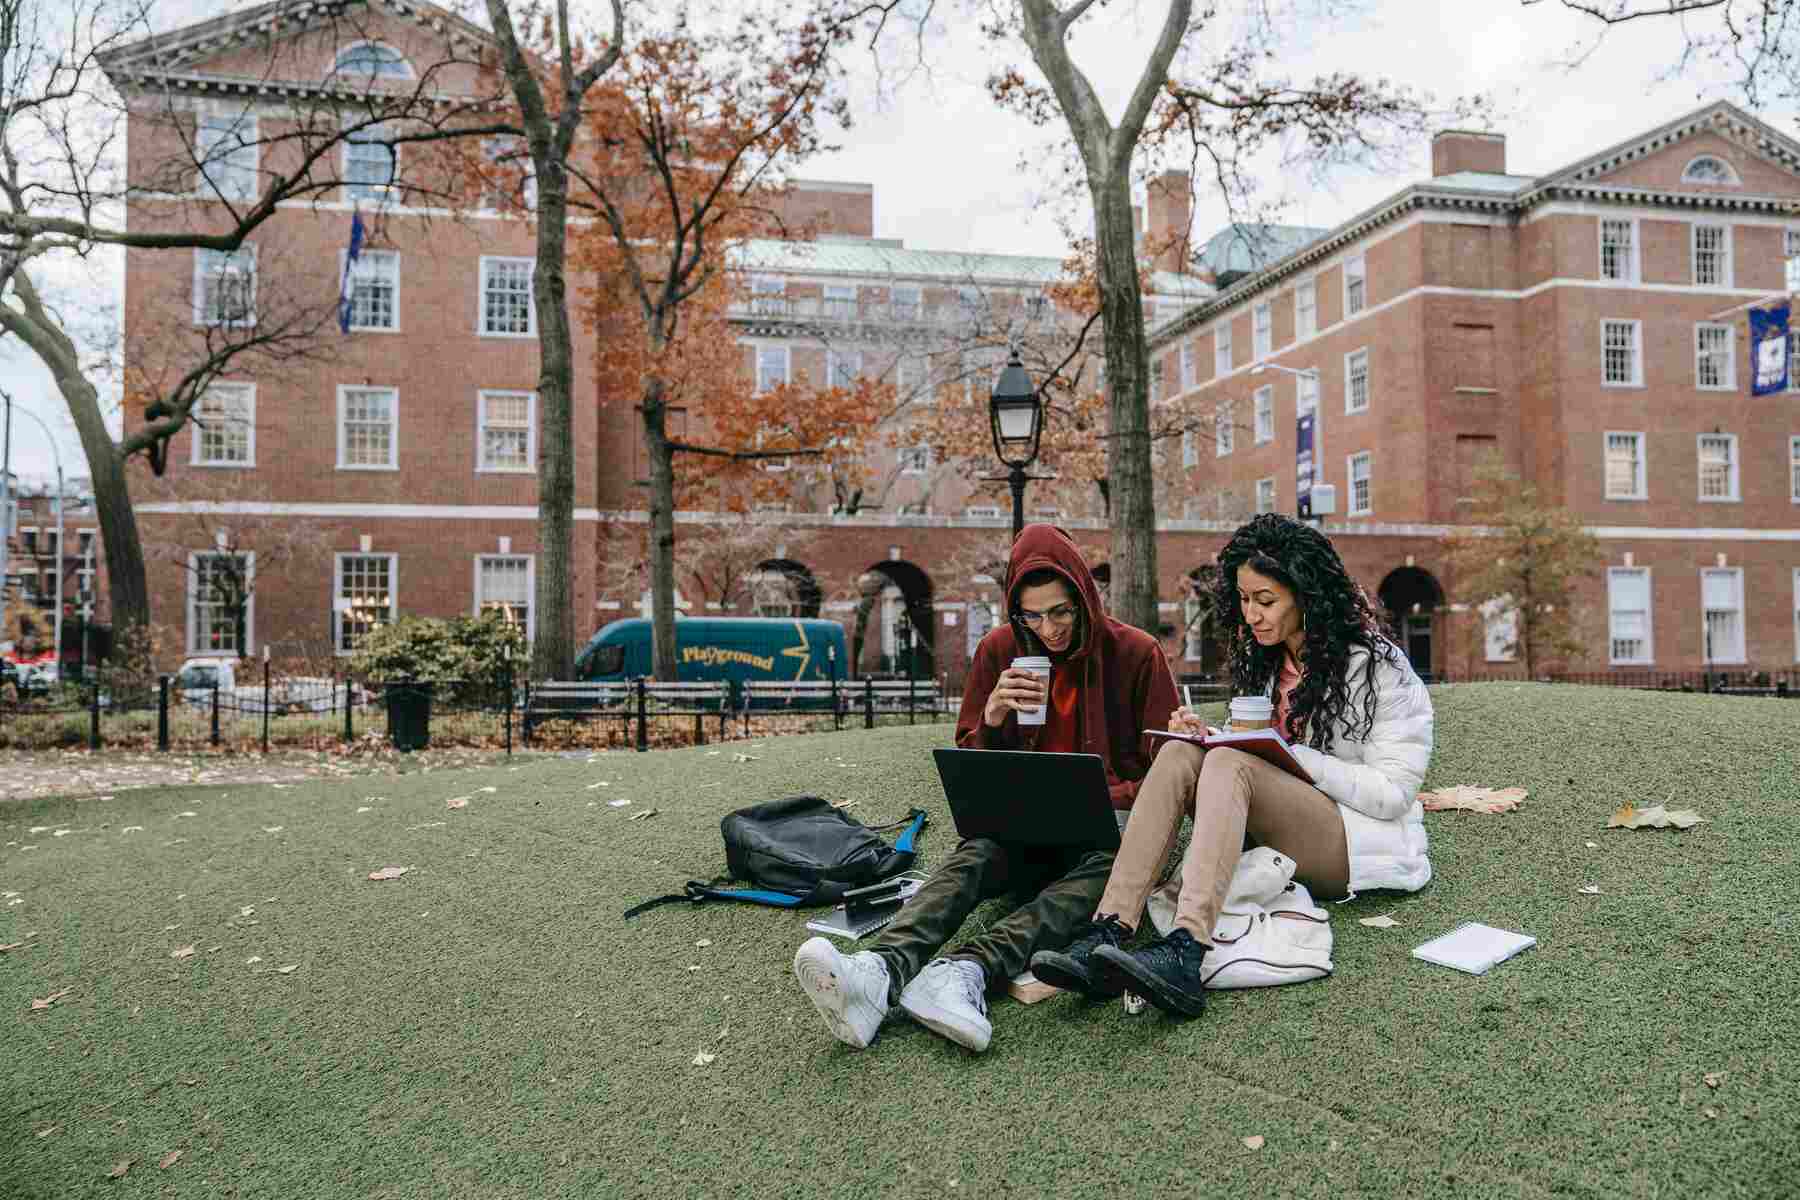 Students sitting and studying on a school lawn